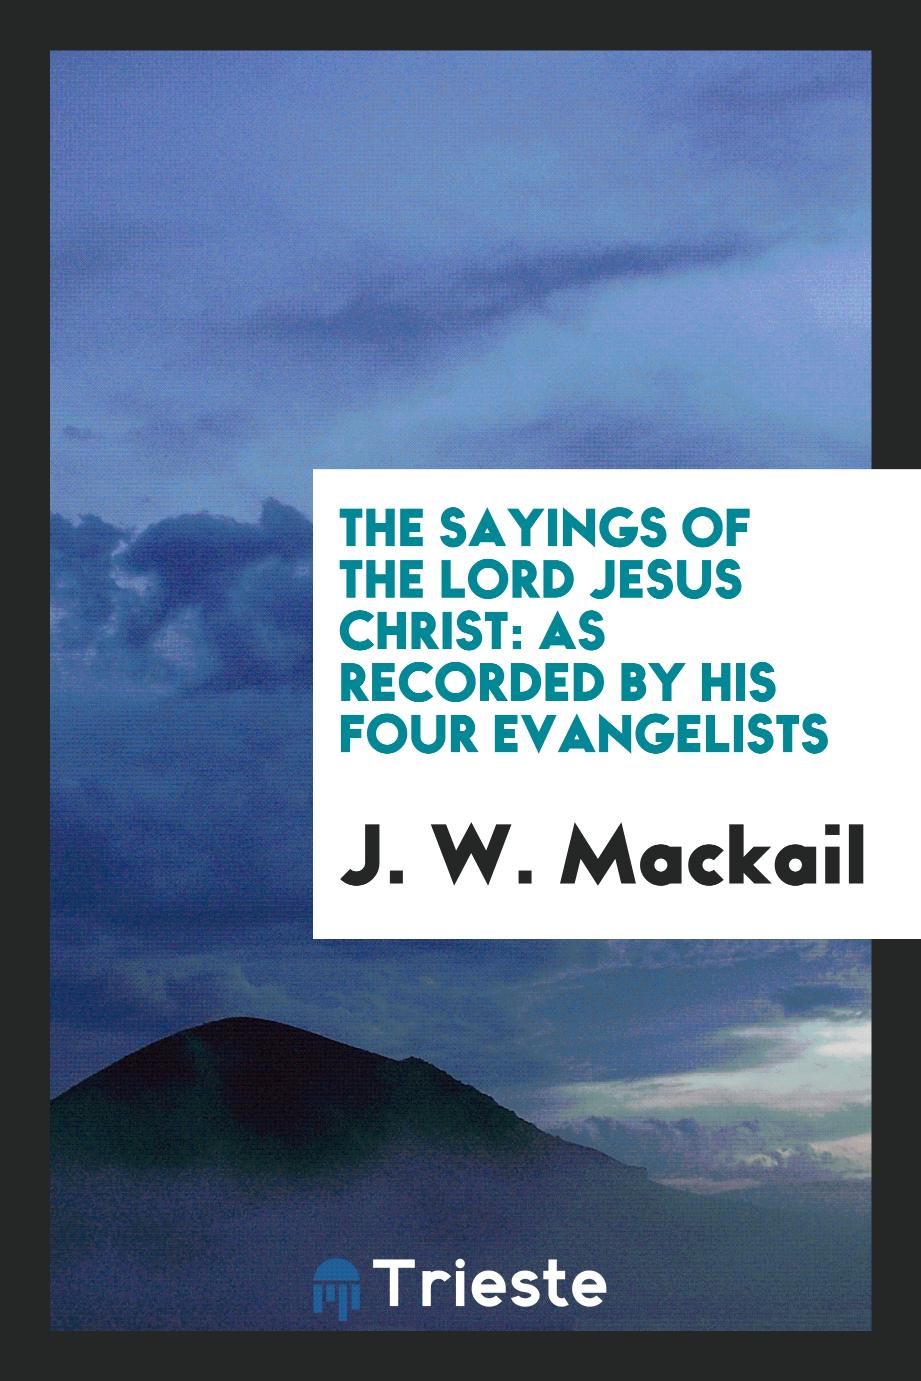 The Sayings of the Lord Jesus Christ: As Recorded by His Four Evangelists